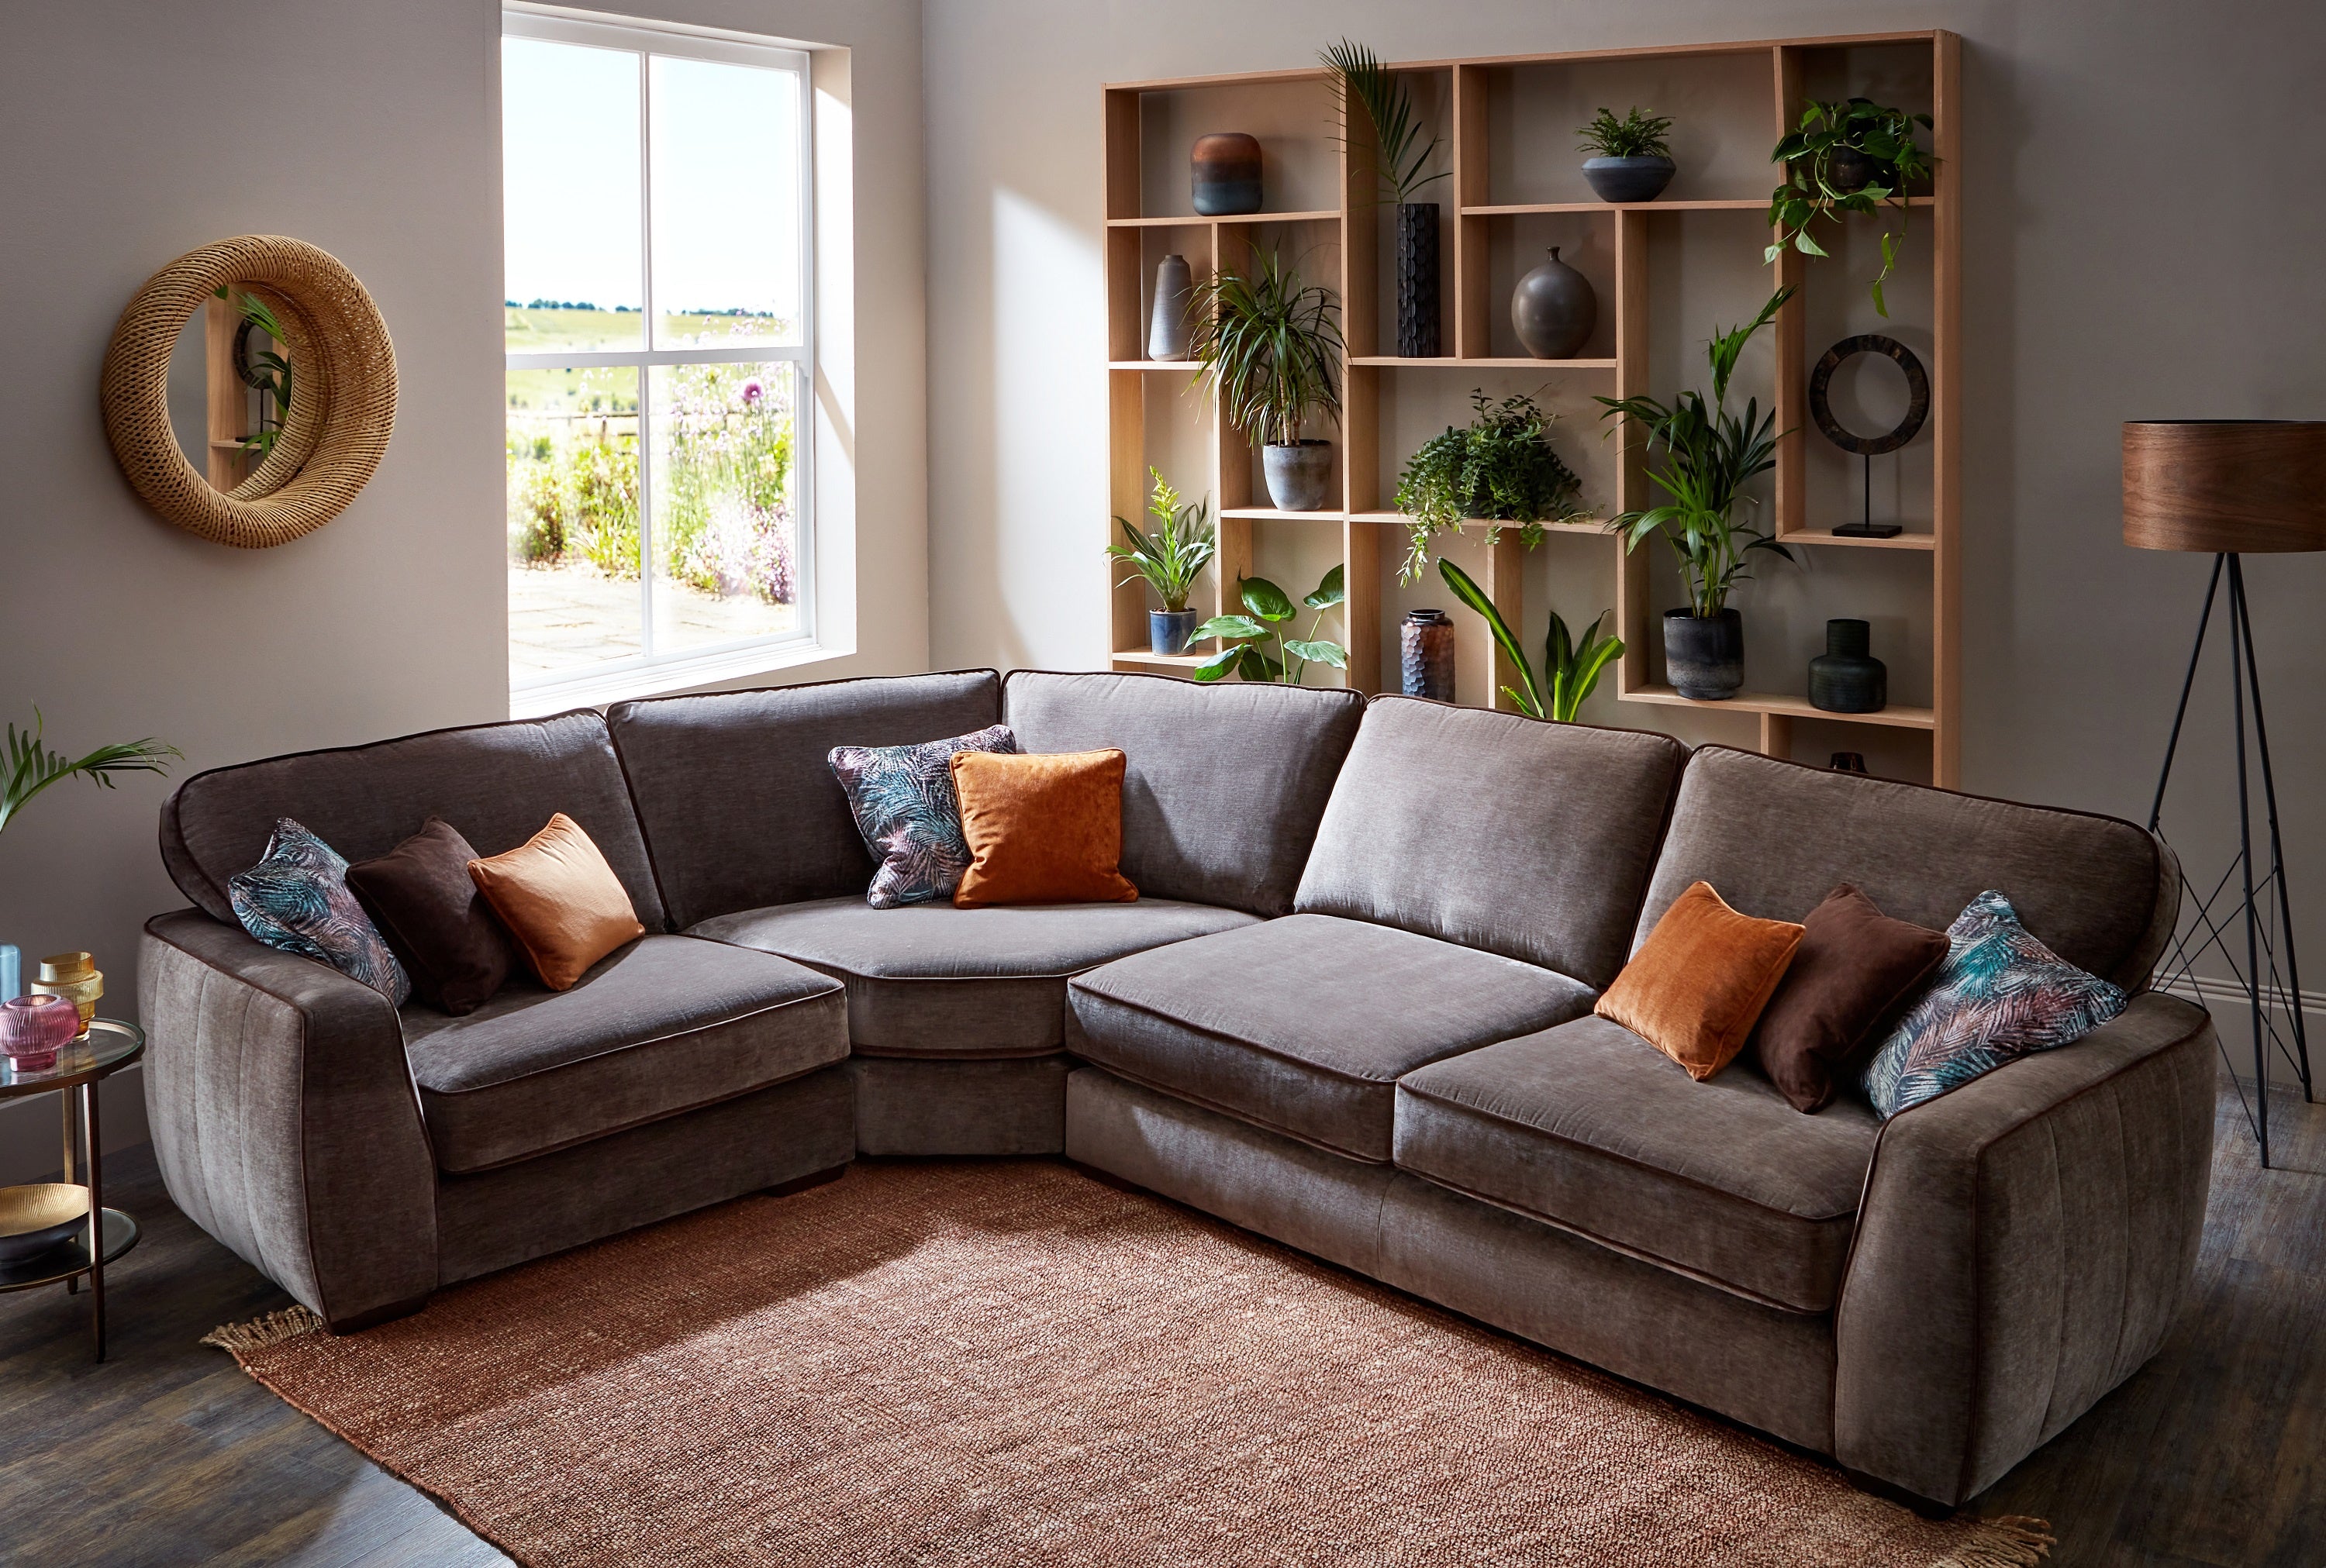 Carson Med Corner Med Sofa  Group Contrast Piping